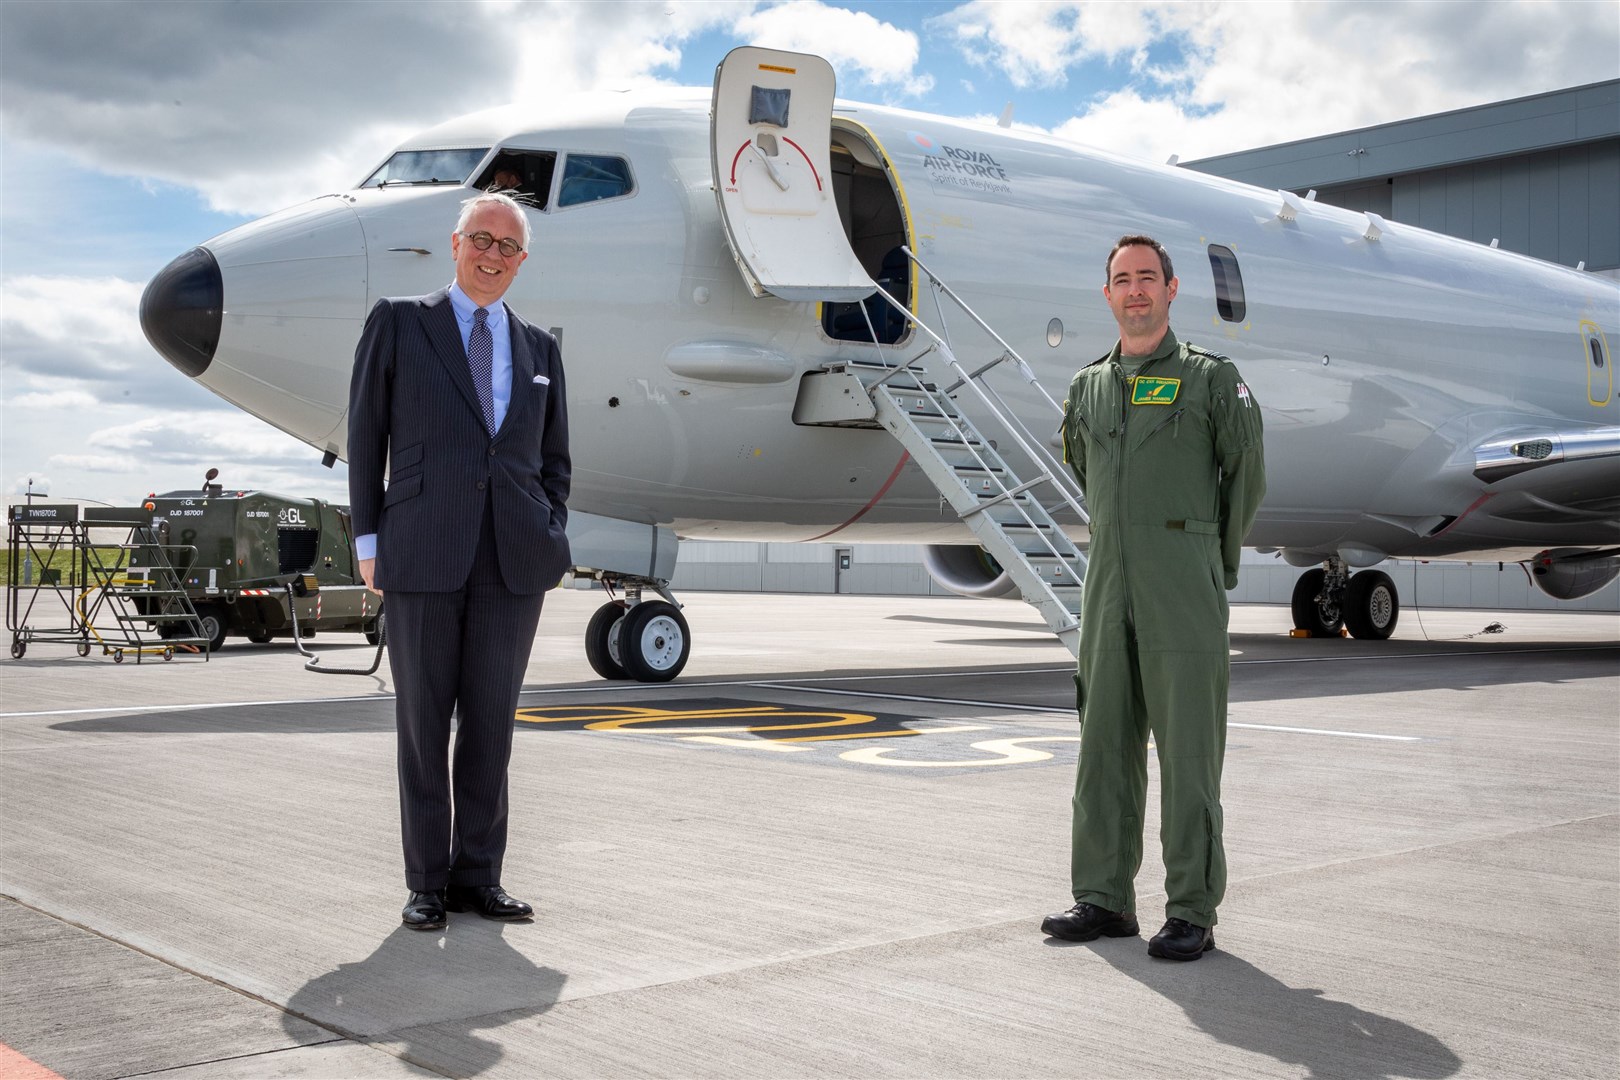 Icelandic ambassador to the UK Sturla Sigurjónsson viewed Poseidon maritime patrol aircraft ZP804, which is named 'Spirit of Reykjavik' in honour of the role played by the Icelandic capital and its people in enabling the Allied victory during the Battle of the Atlantic.